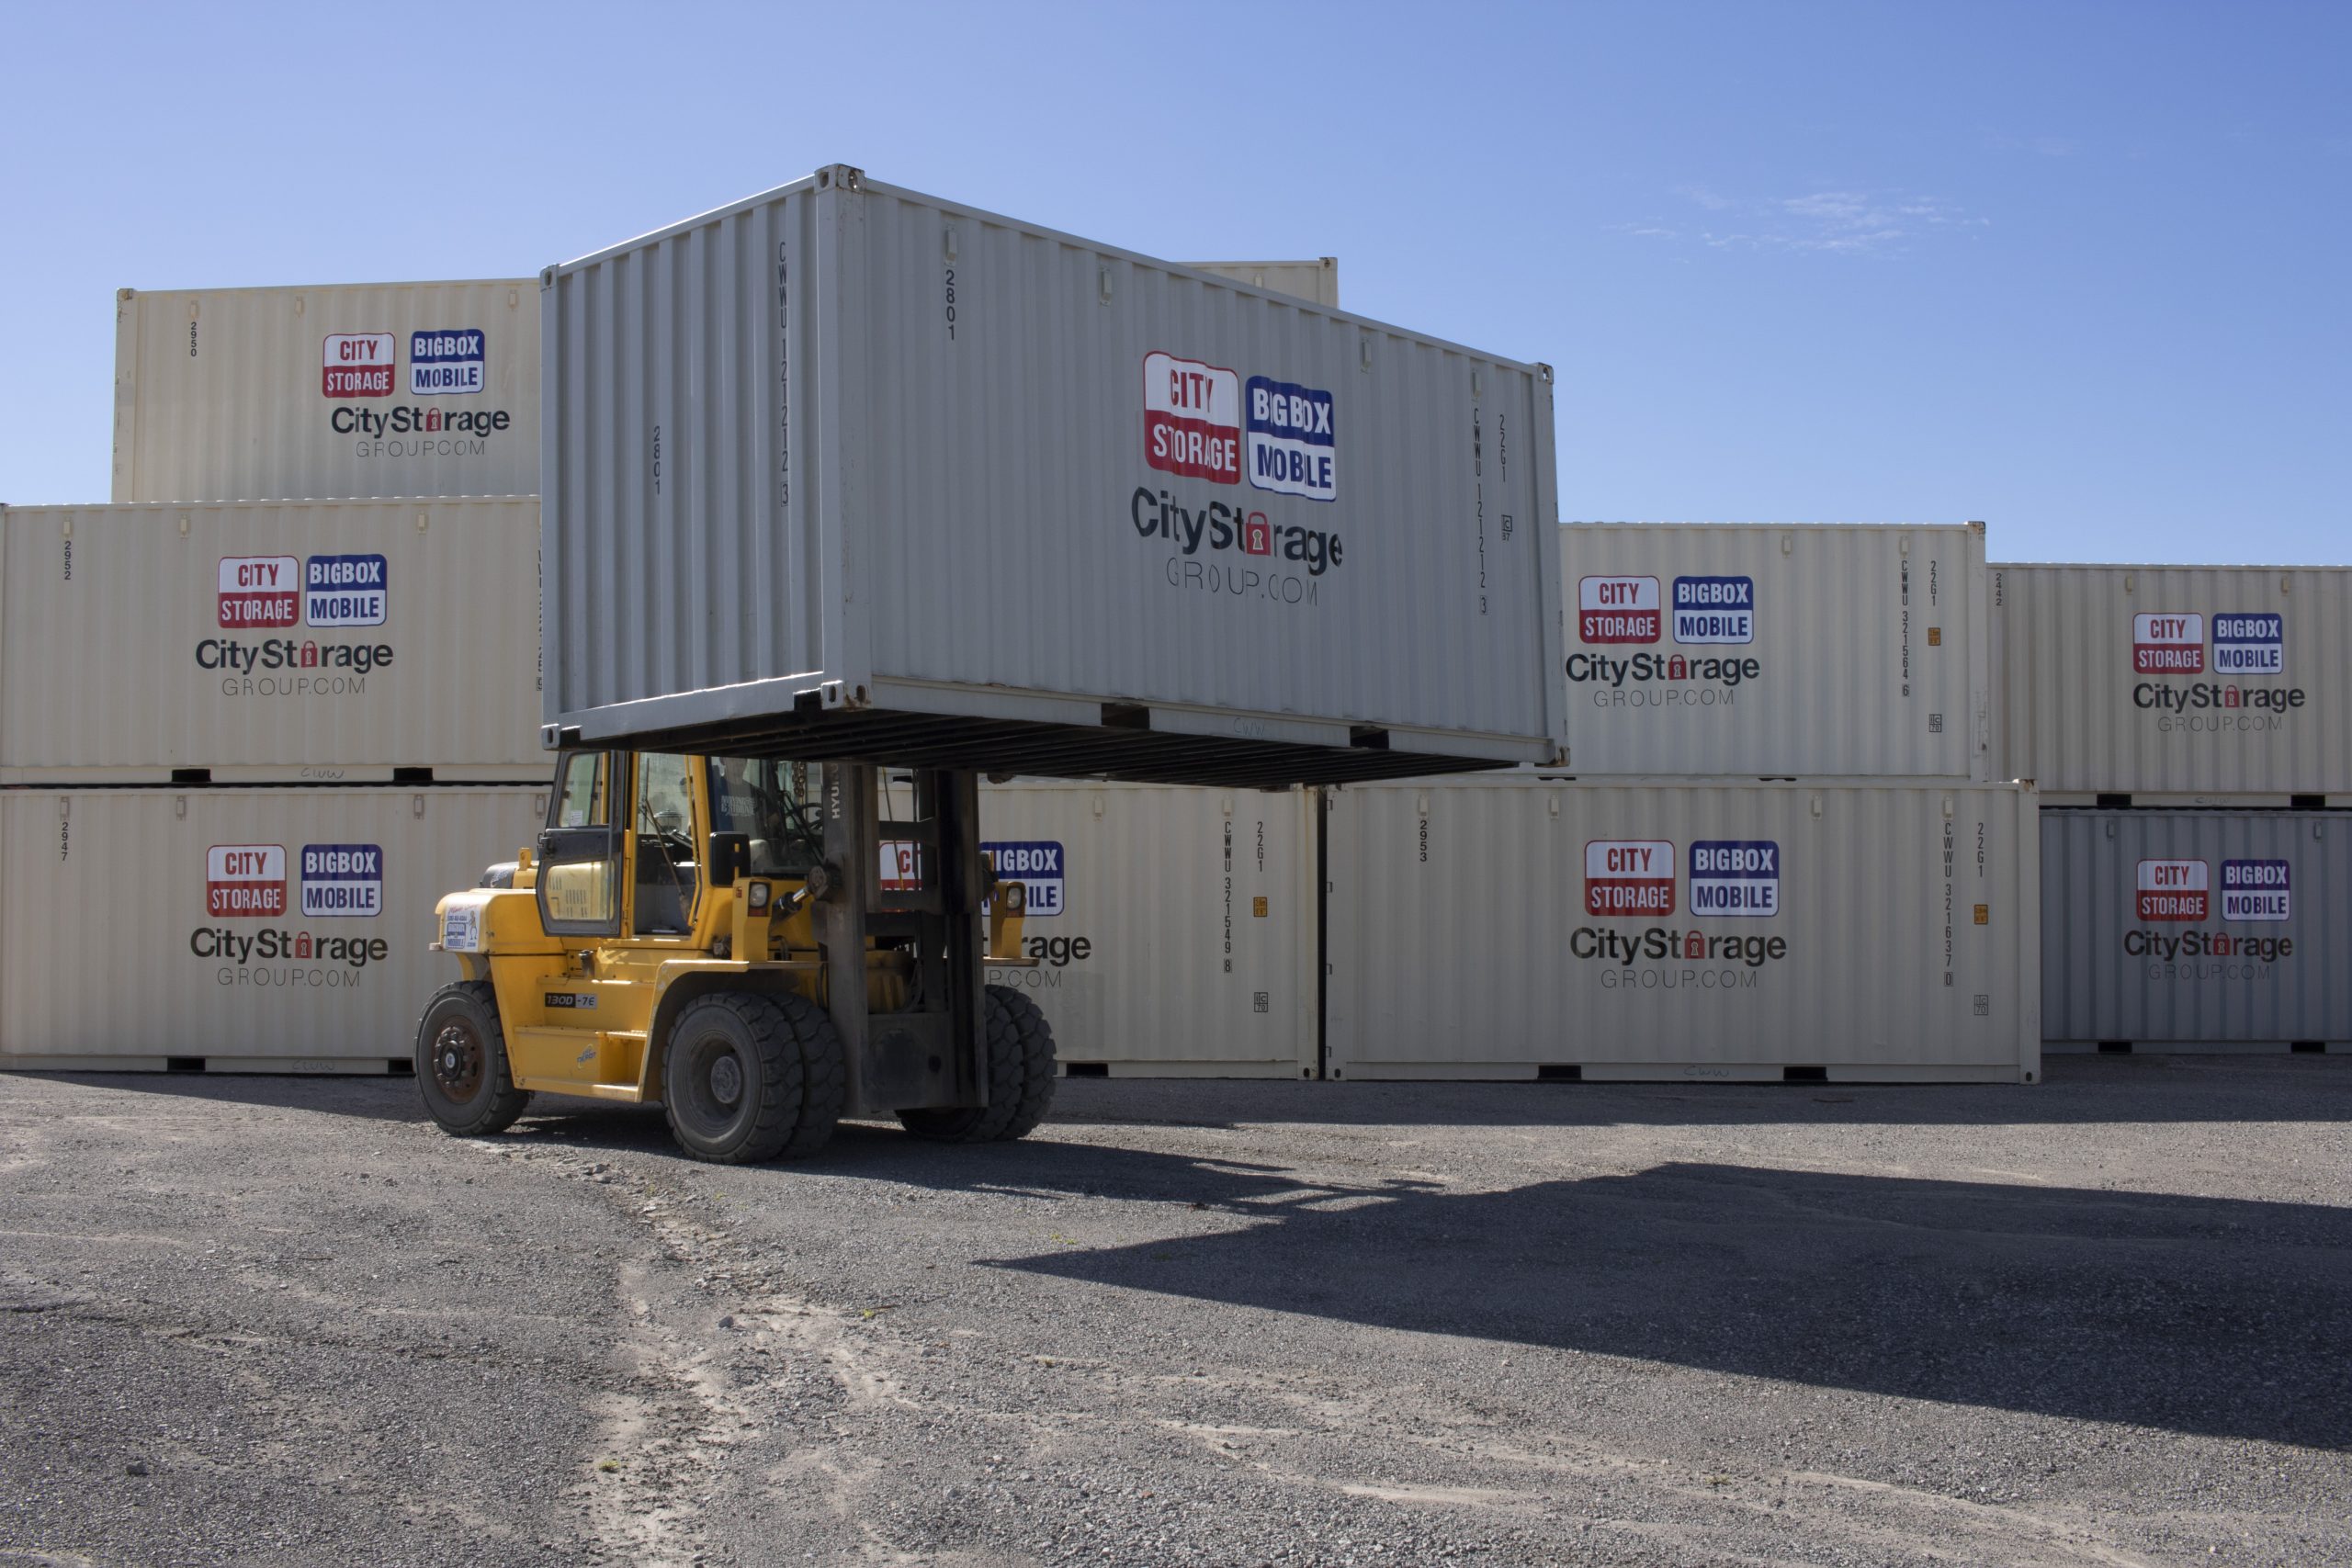 shipping containers used for storage at Big Box Mobile lot in London, Ontario - one lifted up with forklift